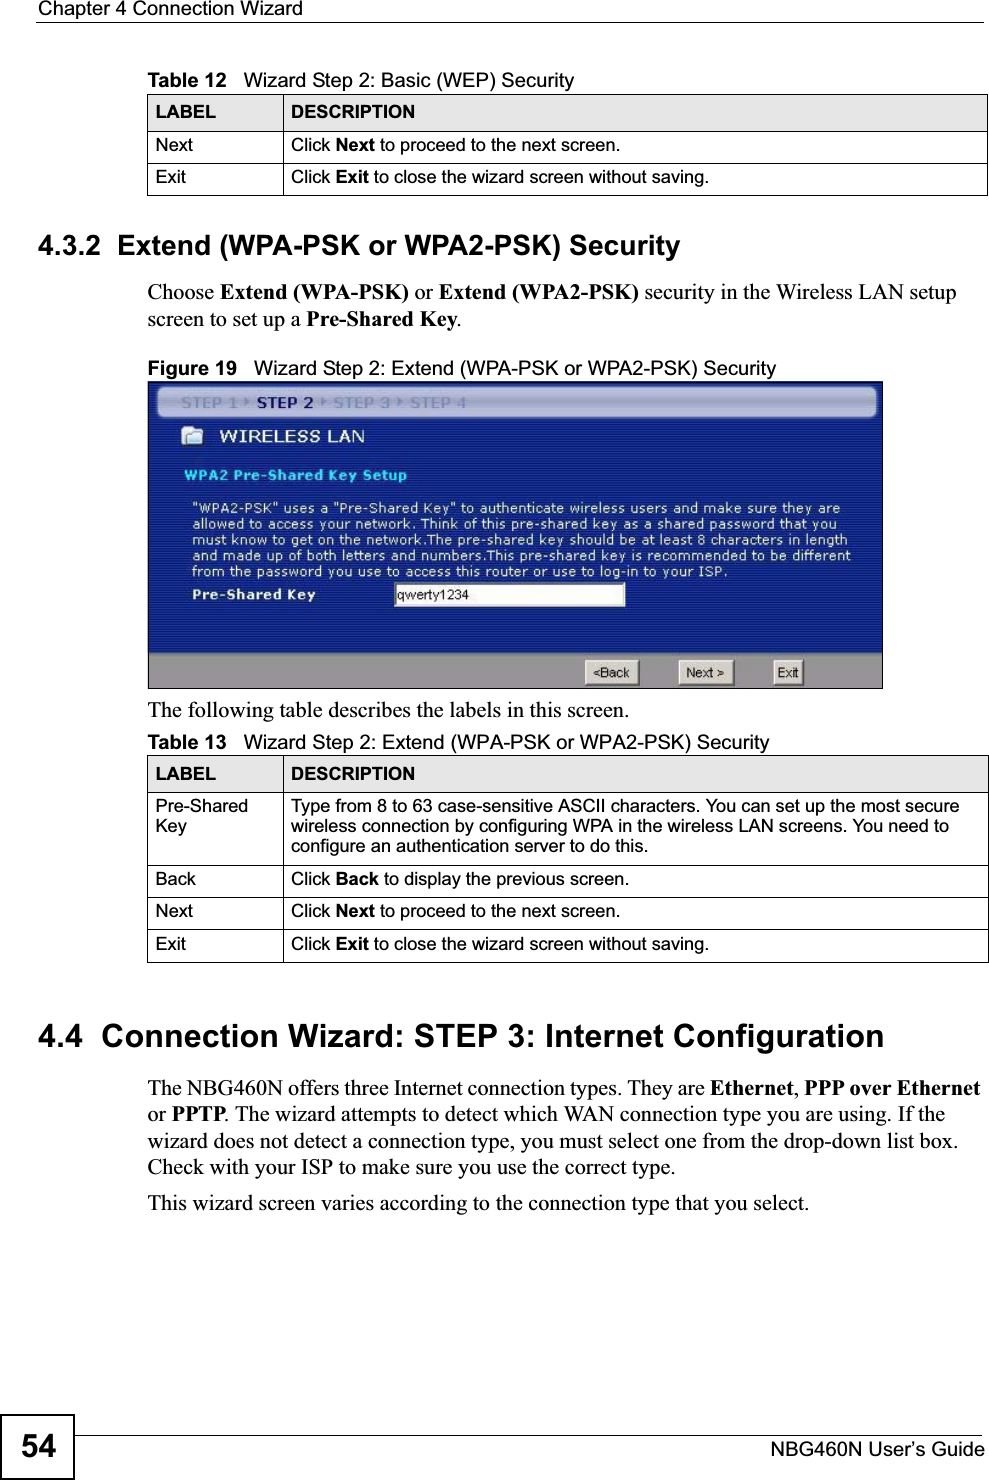 Chapter 4 Connection WizardNBG460N User’s Guide544.3.2  Extend (WPA-PSK or WPA2-PSK) SecurityChoose Extend (WPA-PSK) or Extend (WPA2-PSK) security in the Wireless LAN setup screen to set up a Pre-Shared Key.Figure 19   Wizard Step 2: Extend (WPA-PSK or WPA2-PSK) SecurityThe following table describes the labels in this screen. 4.4  Connection Wizard: STEP 3: Internet ConfigurationThe NBG460N offers three Internet connection types. They are Ethernet,PPP over Ethernet or PPTP. The wizard attempts to detect which WAN connection type you are using. If the wizard does not detect a connection type, you must select one from the drop-down list box. Check with your ISP to make sure you use the correct type.This wizard screen varies according to the connection type that you select.Next Click Next to proceed to the next screen. Exit Click Exit to close the wizard screen without saving.Table 12   Wizard Step 2: Basic (WEP) SecurityLABEL DESCRIPTIONTable 13   Wizard Step 2: Extend (WPA-PSK or WPA2-PSK) SecurityLABEL DESCRIPTIONPre-Shared KeyType from 8 to 63 case-sensitive ASCII characters. You can set up the most secure wireless connection by configuring WPA in the wireless LAN screens. You need to configure an authentication server to do this.Back Click Back to display the previous screen.Next Click Next to proceed to the next screen. Exit Click Exit to close the wizard screen without saving.